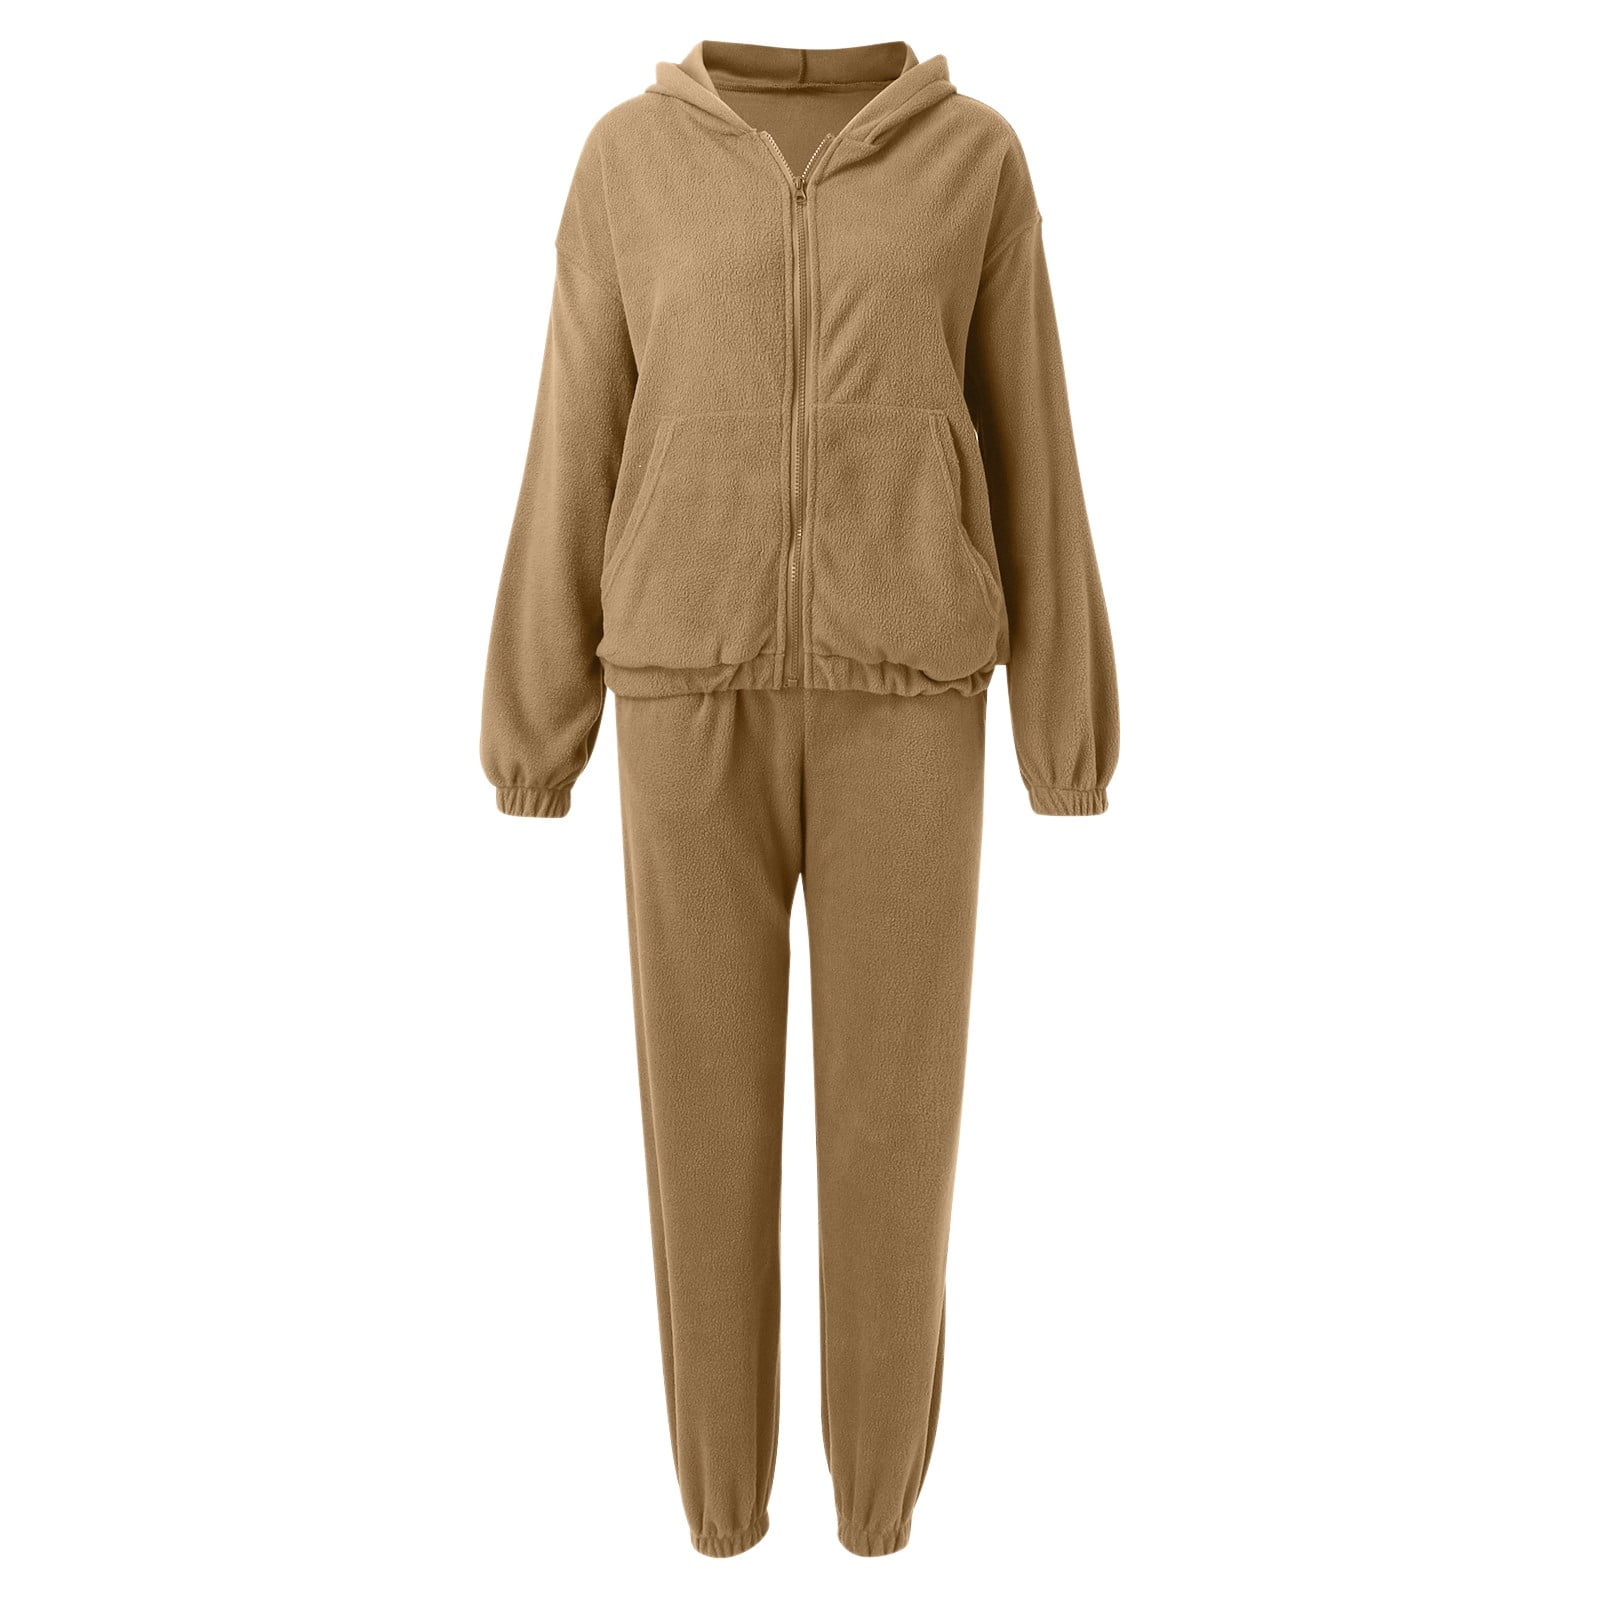 Larisalt Matching Sets For Women,Women Stripe Patchwork Two Piece Sweatsuit  Round Neck Pullover and Skinny Long Pants Sets Yellow,XL - Walmart.com